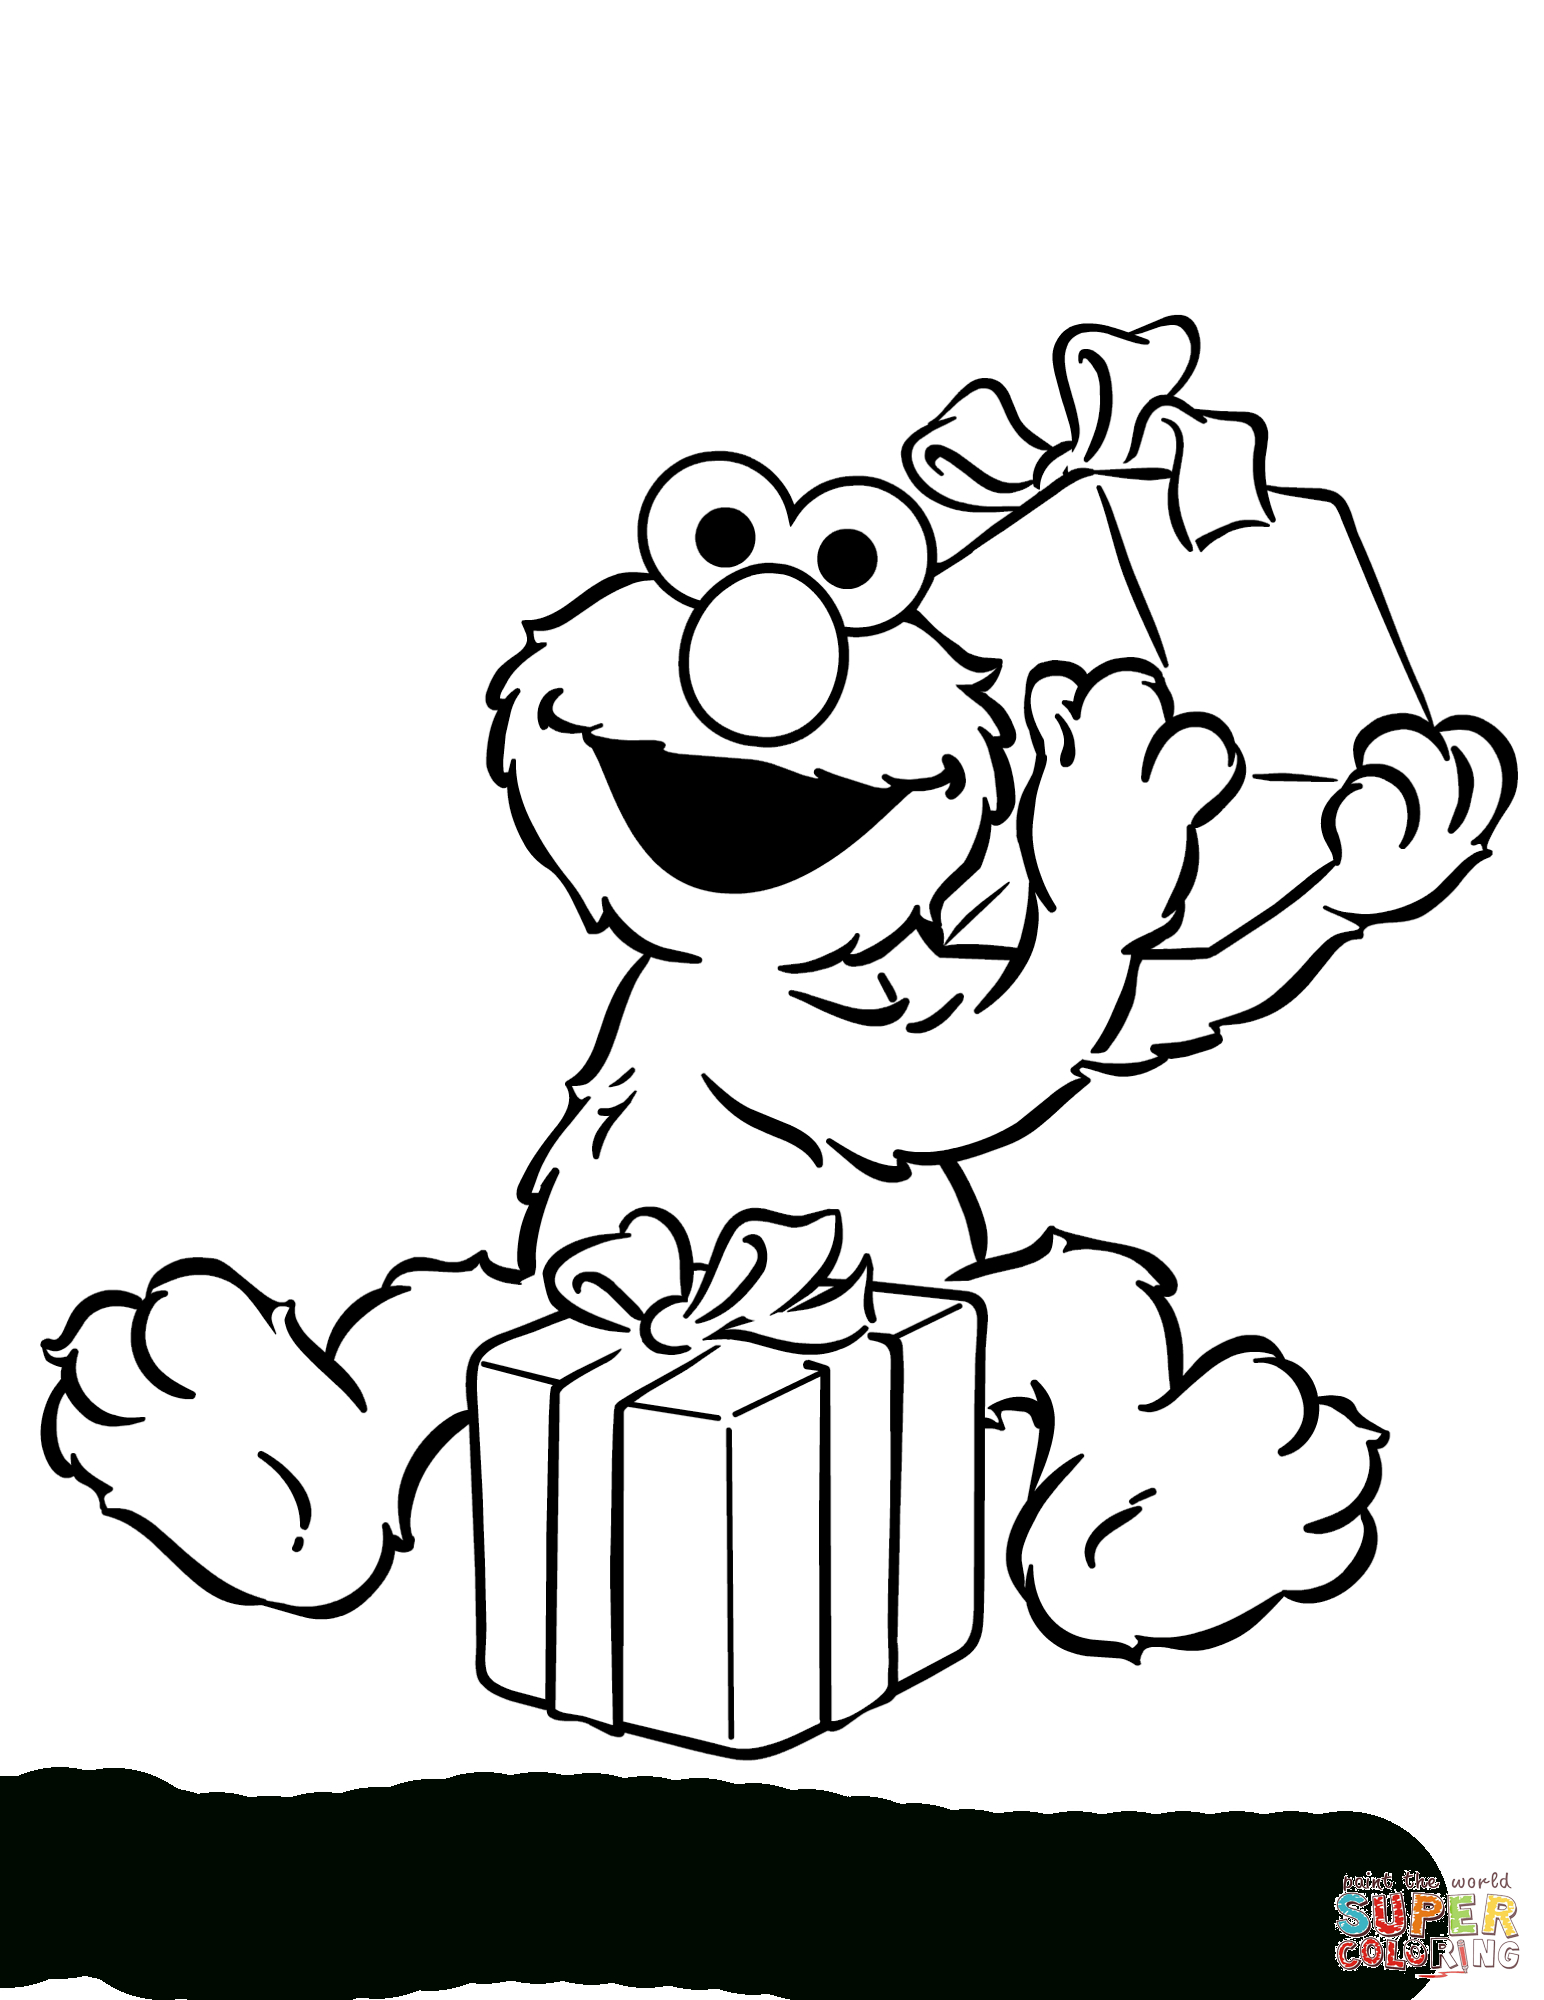 Elmo Coloring Page | Free Printable Coloring Pages - Elmo Color Pages Free Printable